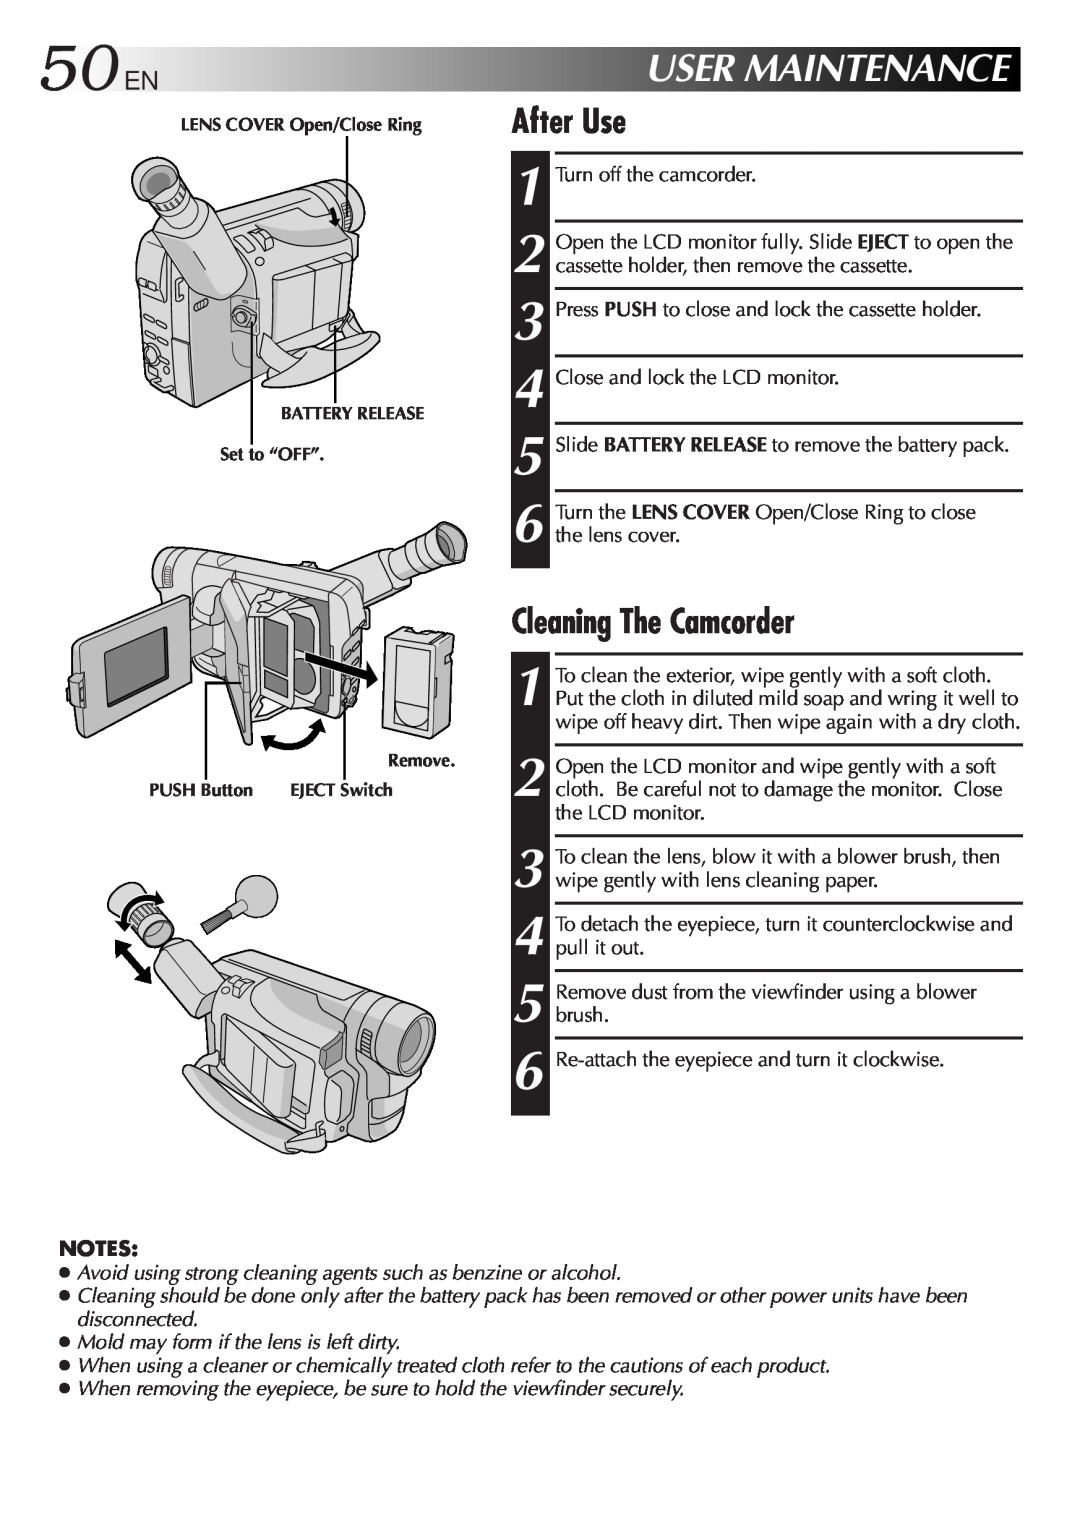 JVC GR-SXM321 specifications 50EN, Usermaintenance, Cleaning The Camcorder, After Use 